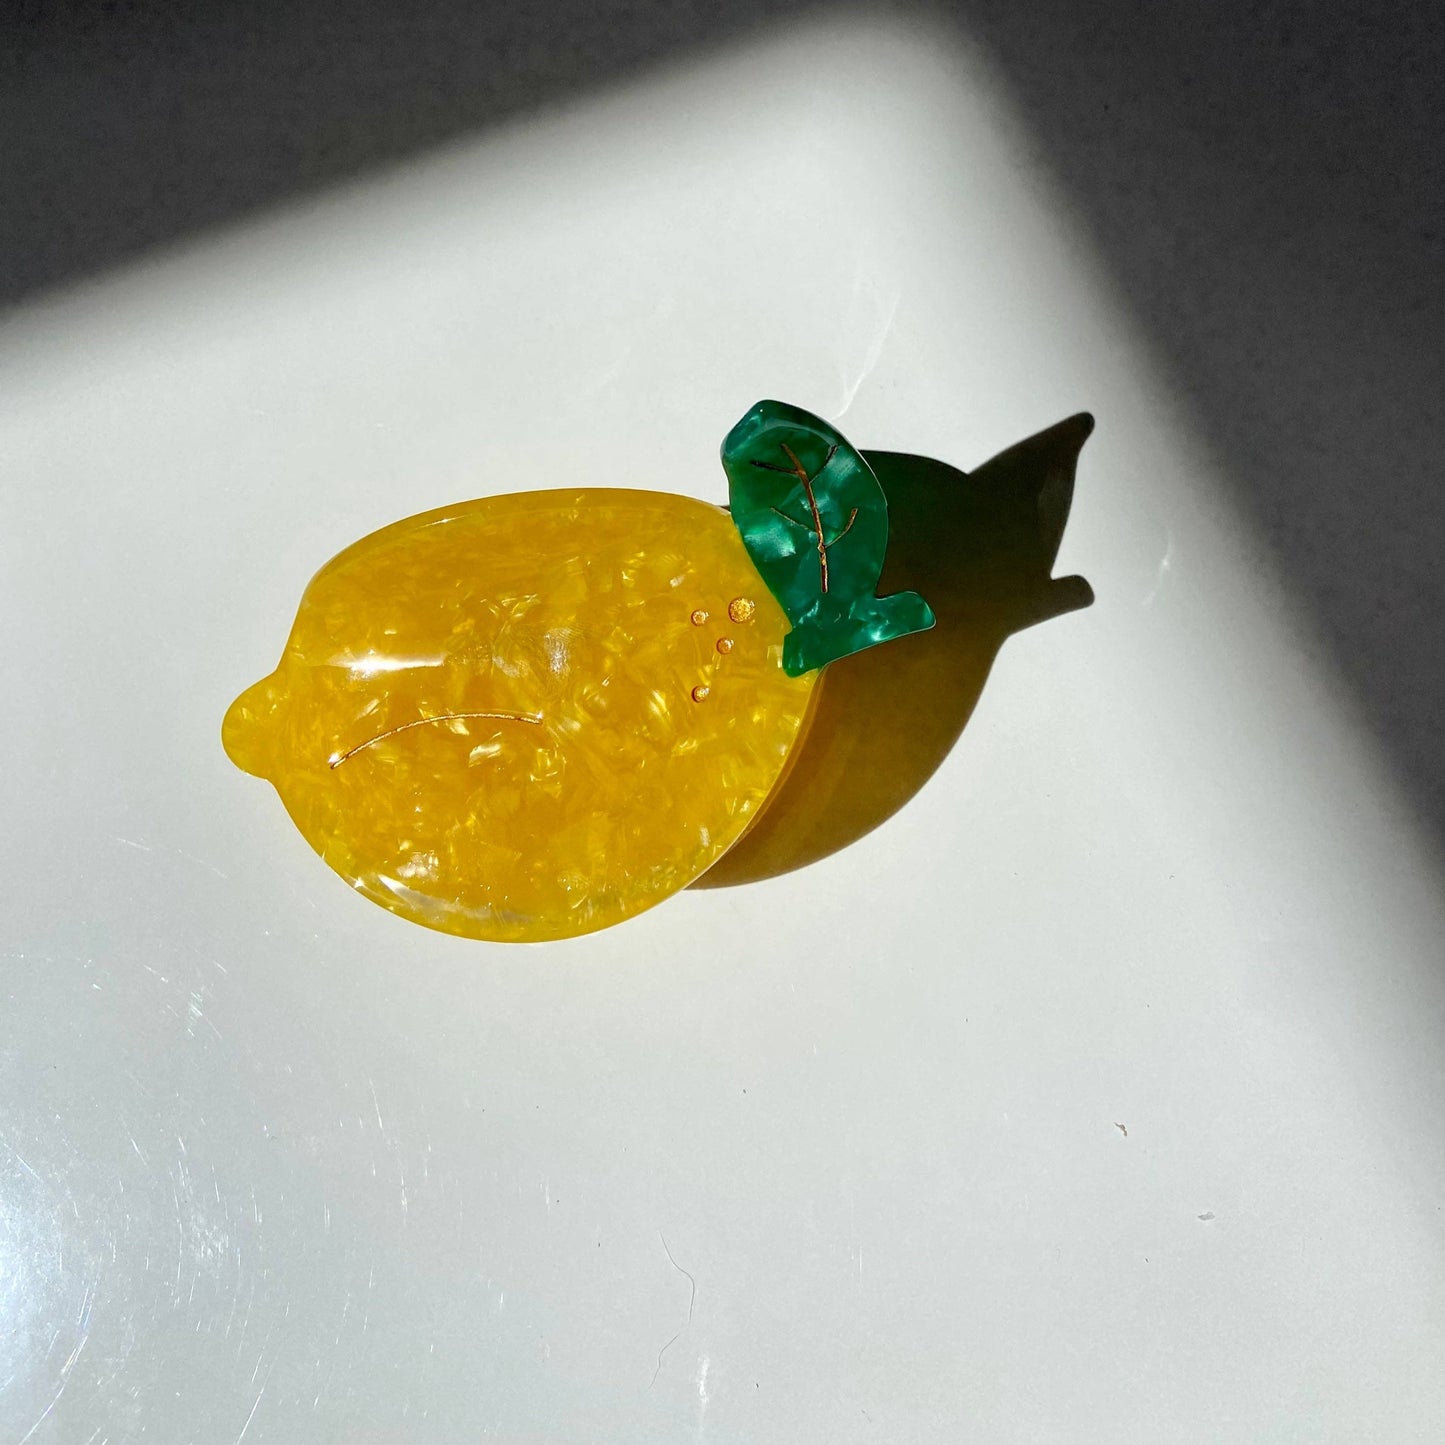 Hair claw/clip made to look like a lemon -- made of acetate; leaves are green with gold accents, body is yellow